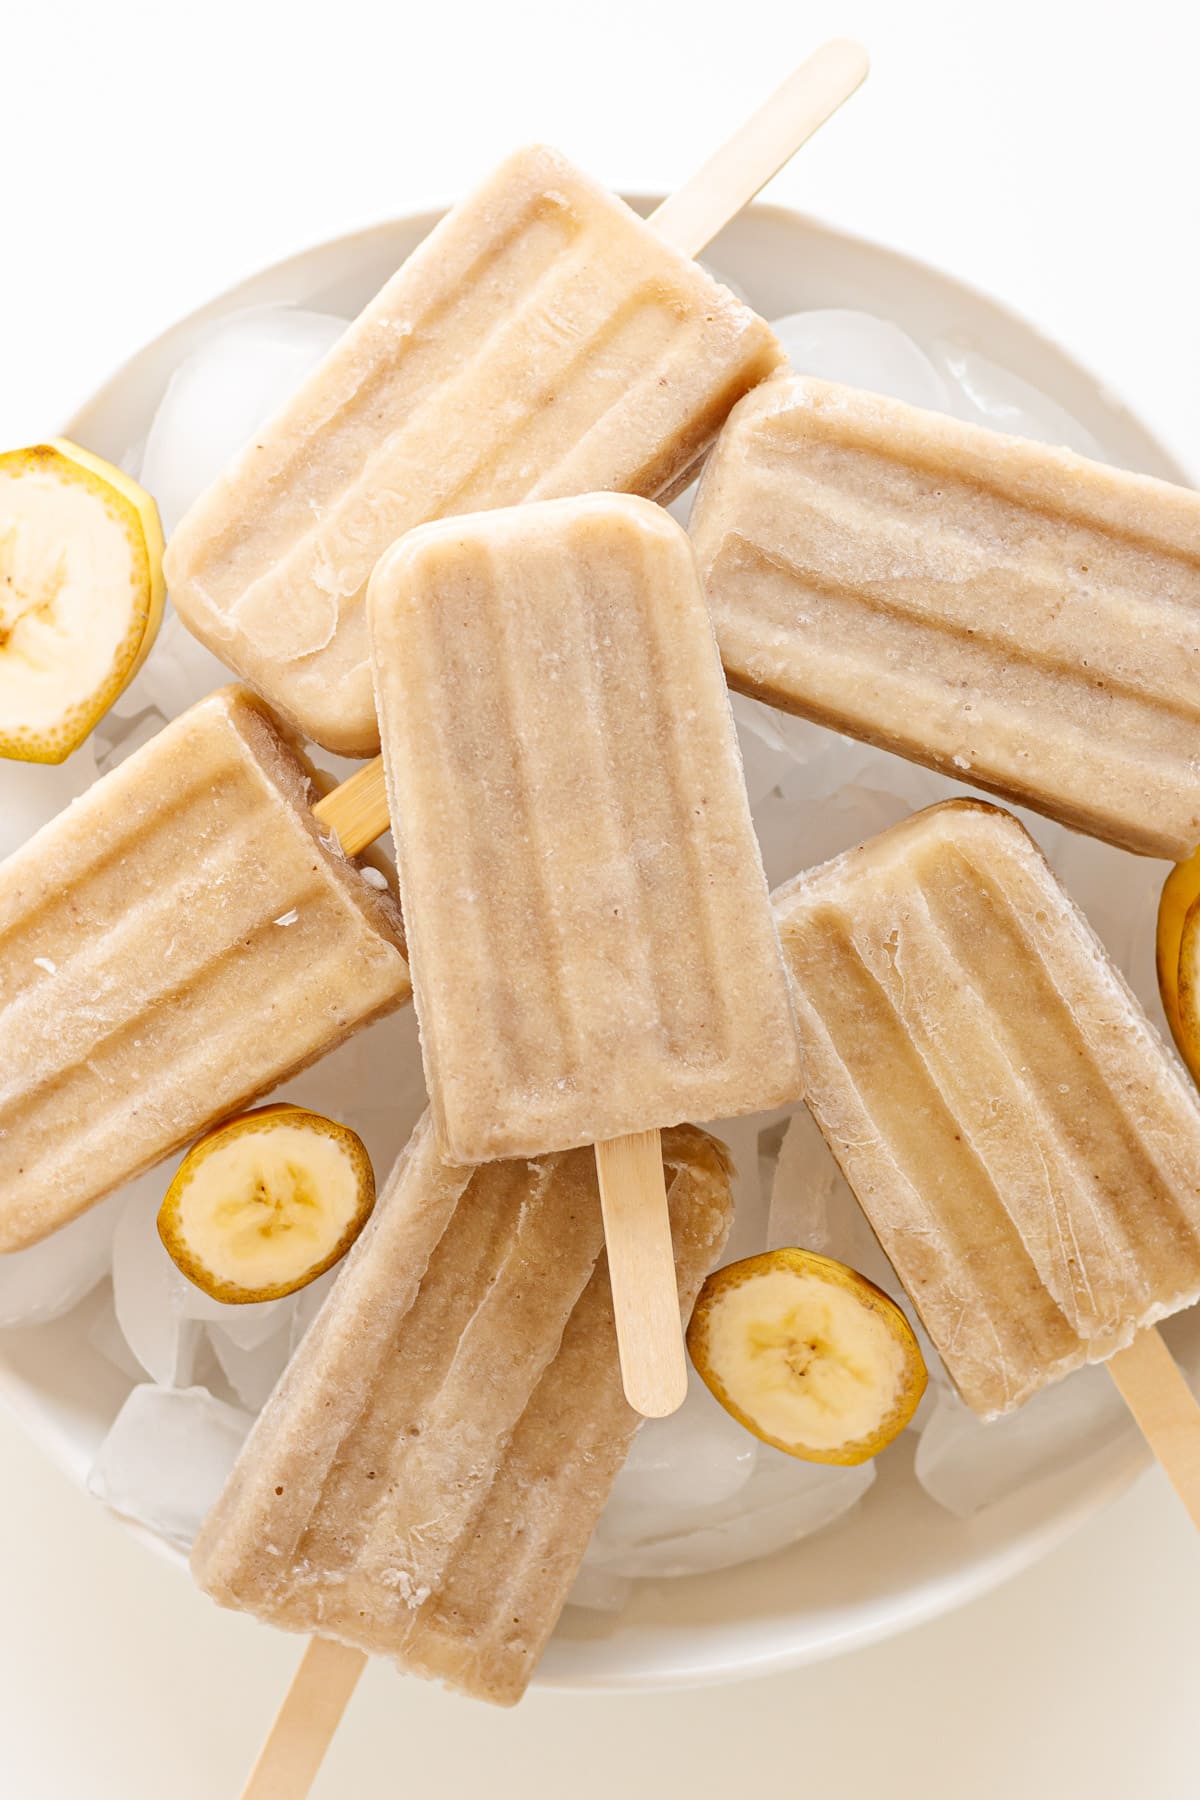 Banana popsicles piled on top of a large white serving bowl of ice.